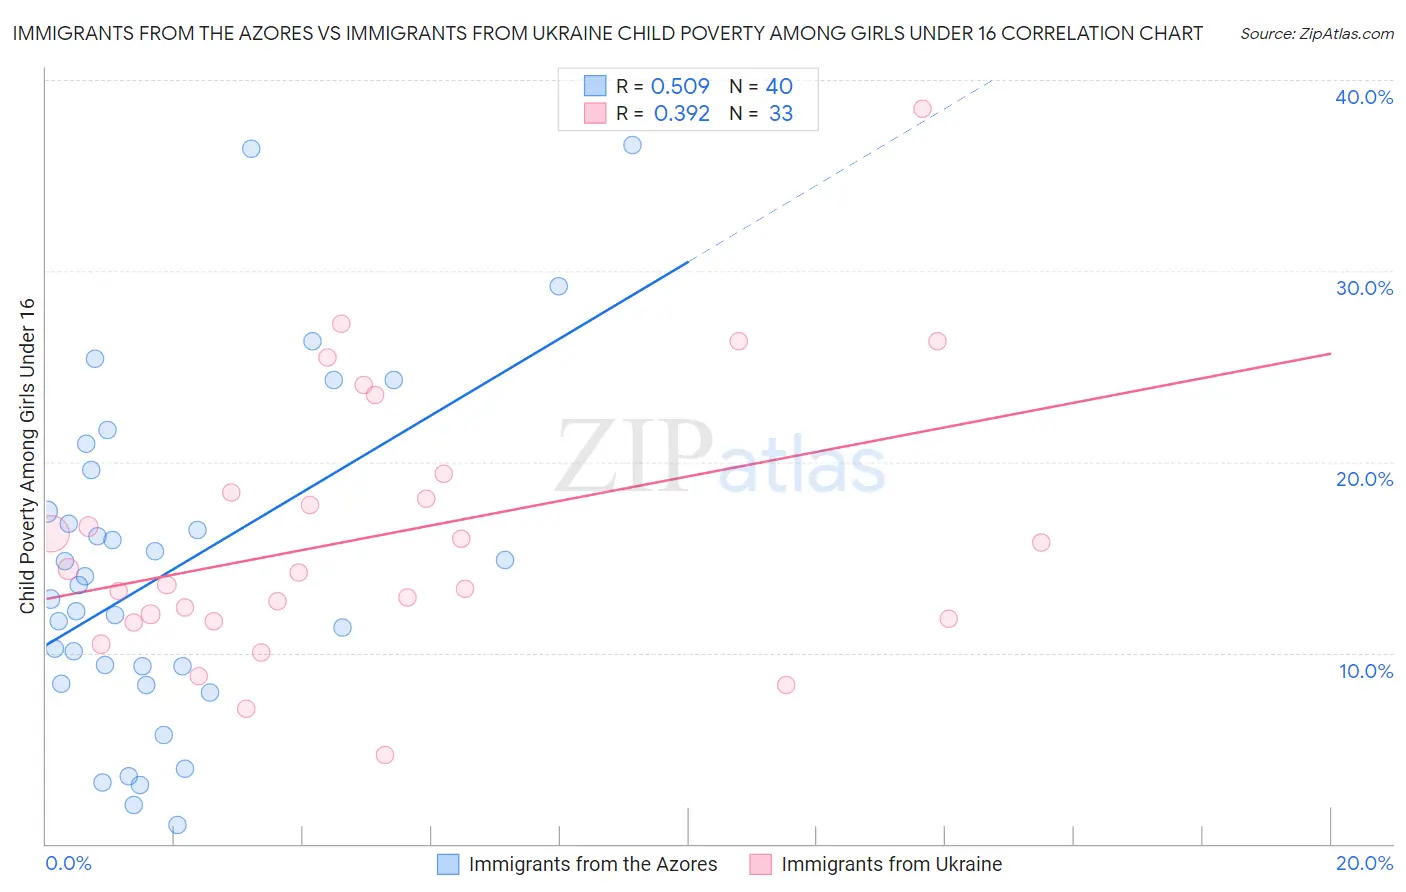 Immigrants from the Azores vs Immigrants from Ukraine Child Poverty Among Girls Under 16